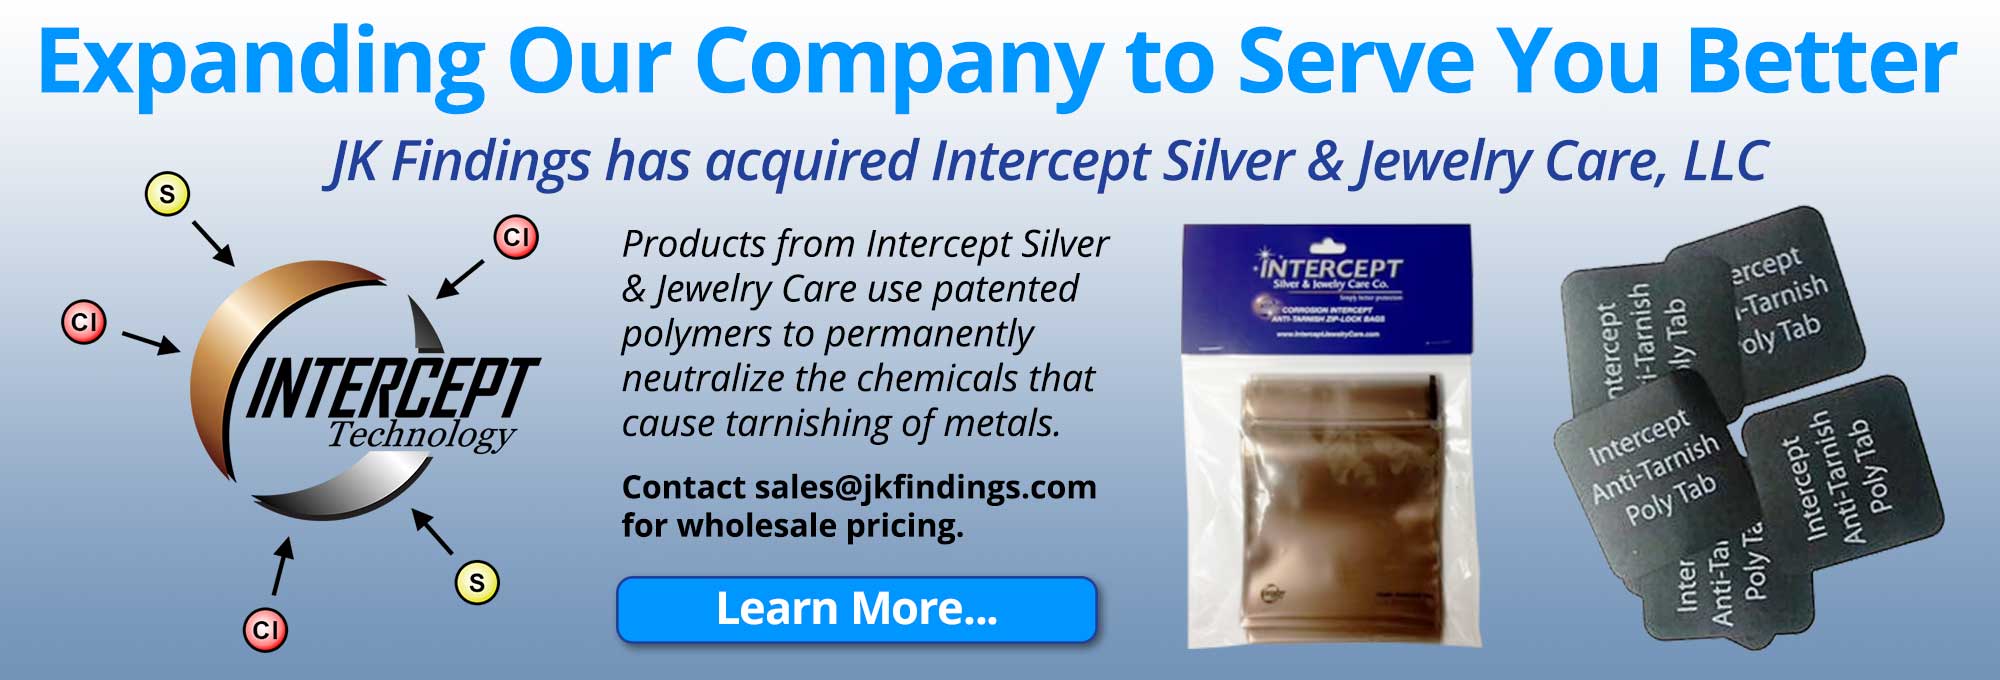 JK Findings Acquires Intercept Silver and Jewelry Care